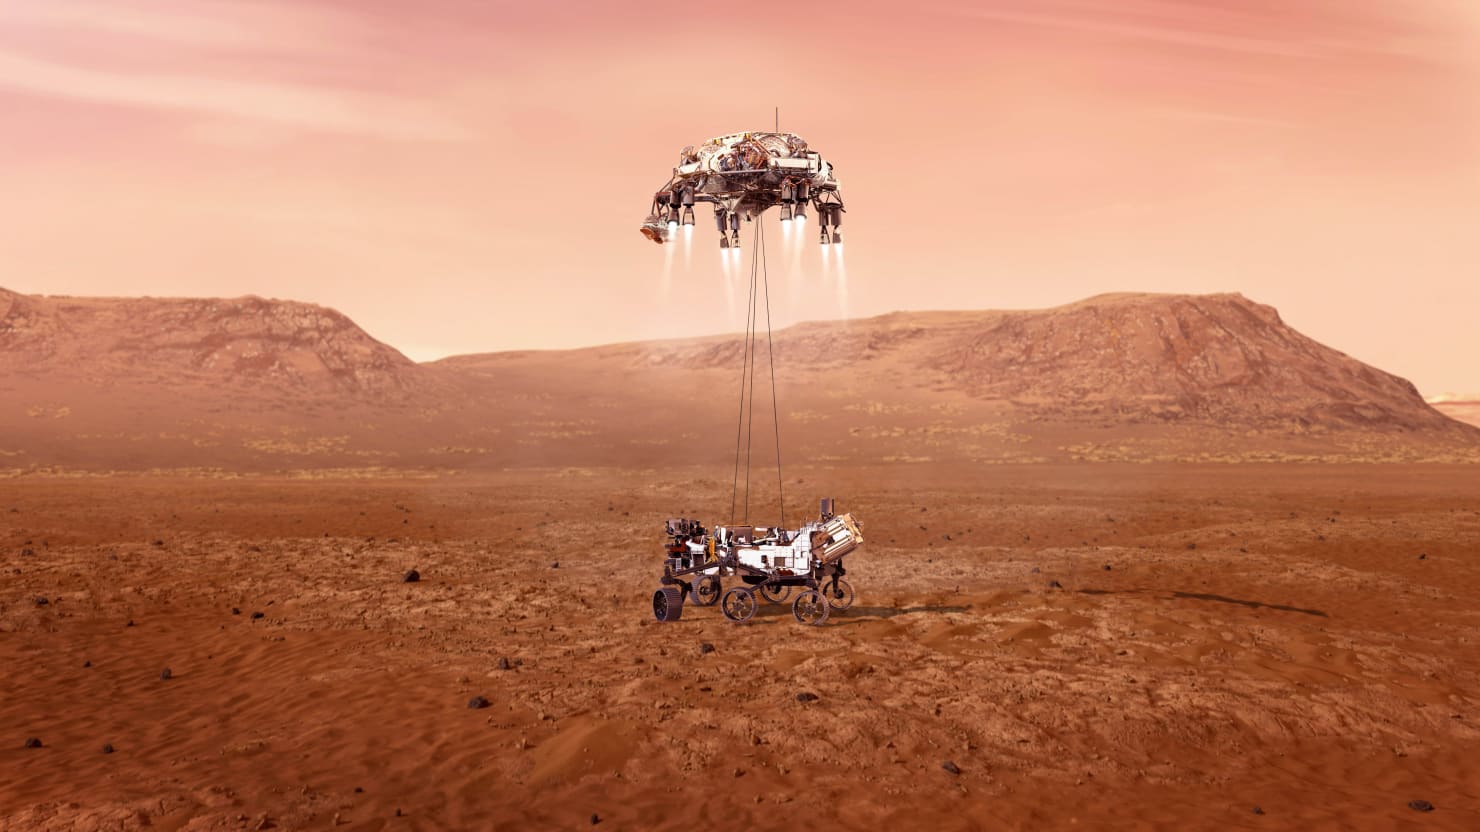 News, Sending humans to Mars: How a trash compactor might help